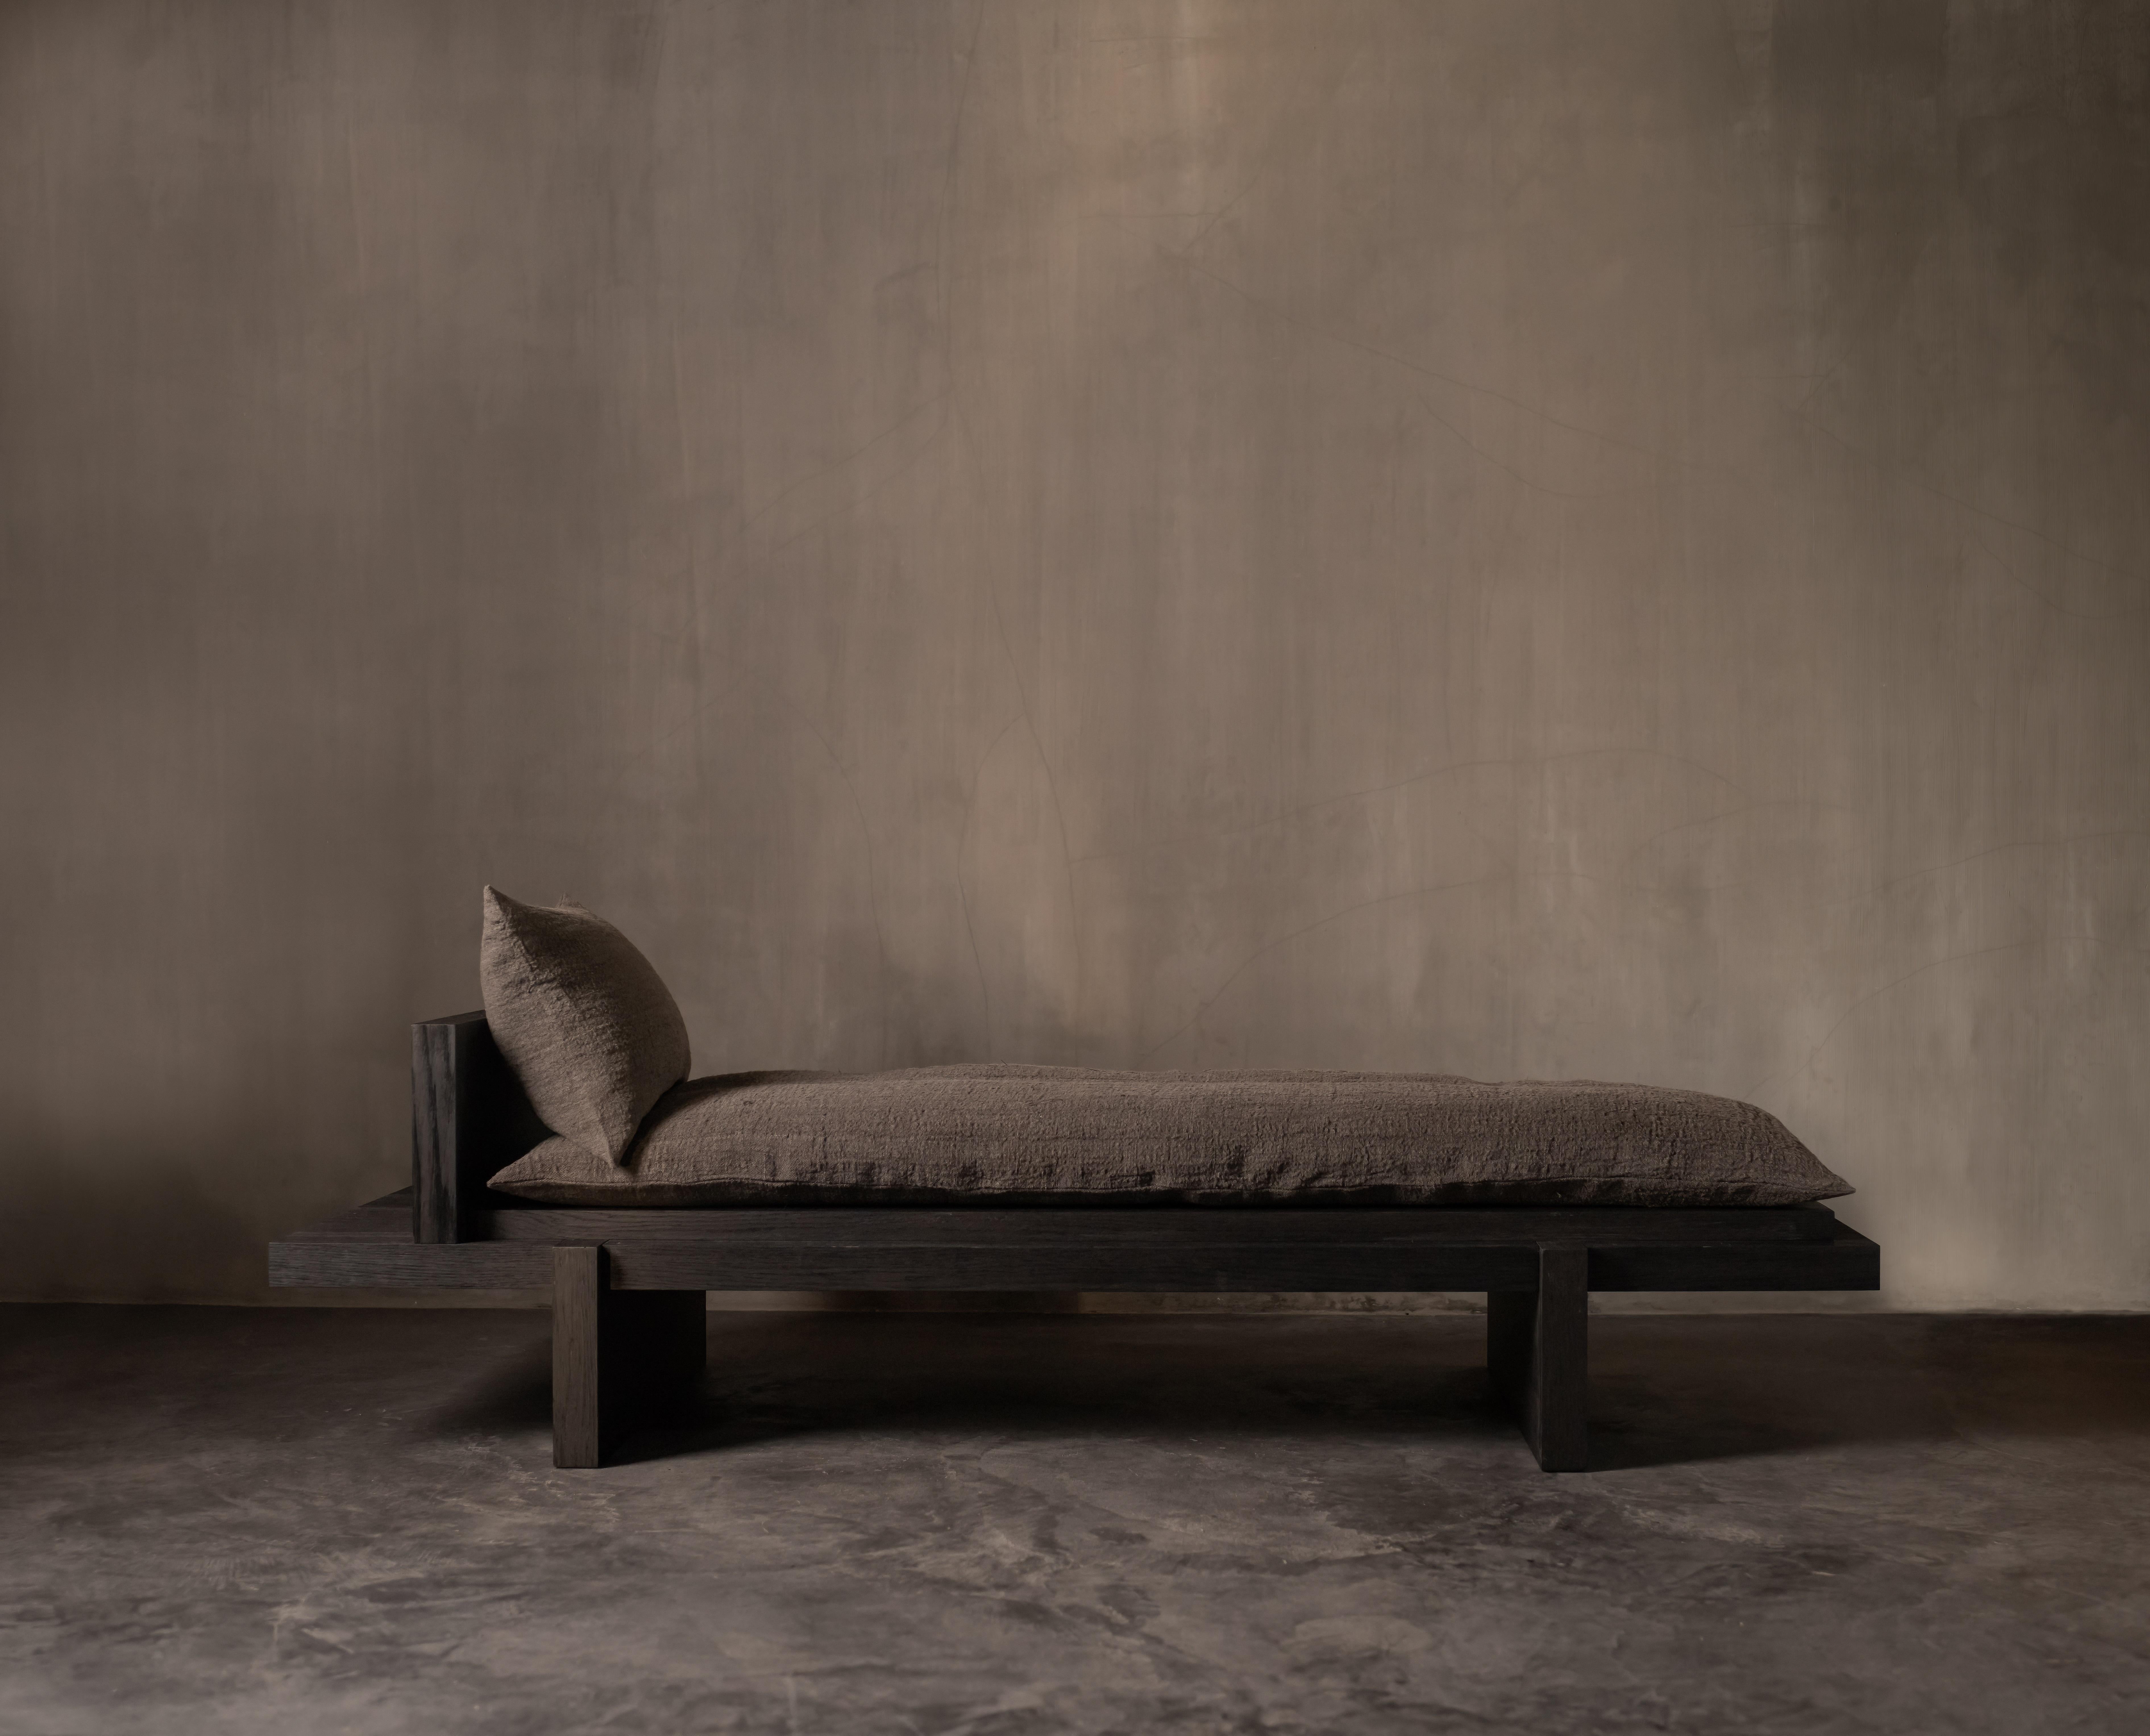 Yoishu Daybed by Kana objects.
Dimensions: D 80 x W 220 x H 35 cm.
Materials: smoked oak, vintage hemp fabric.
Also available in natural oak and swamp oak.
Available in different fabrics.

Japanese Daybed

The Yoishu series represents a